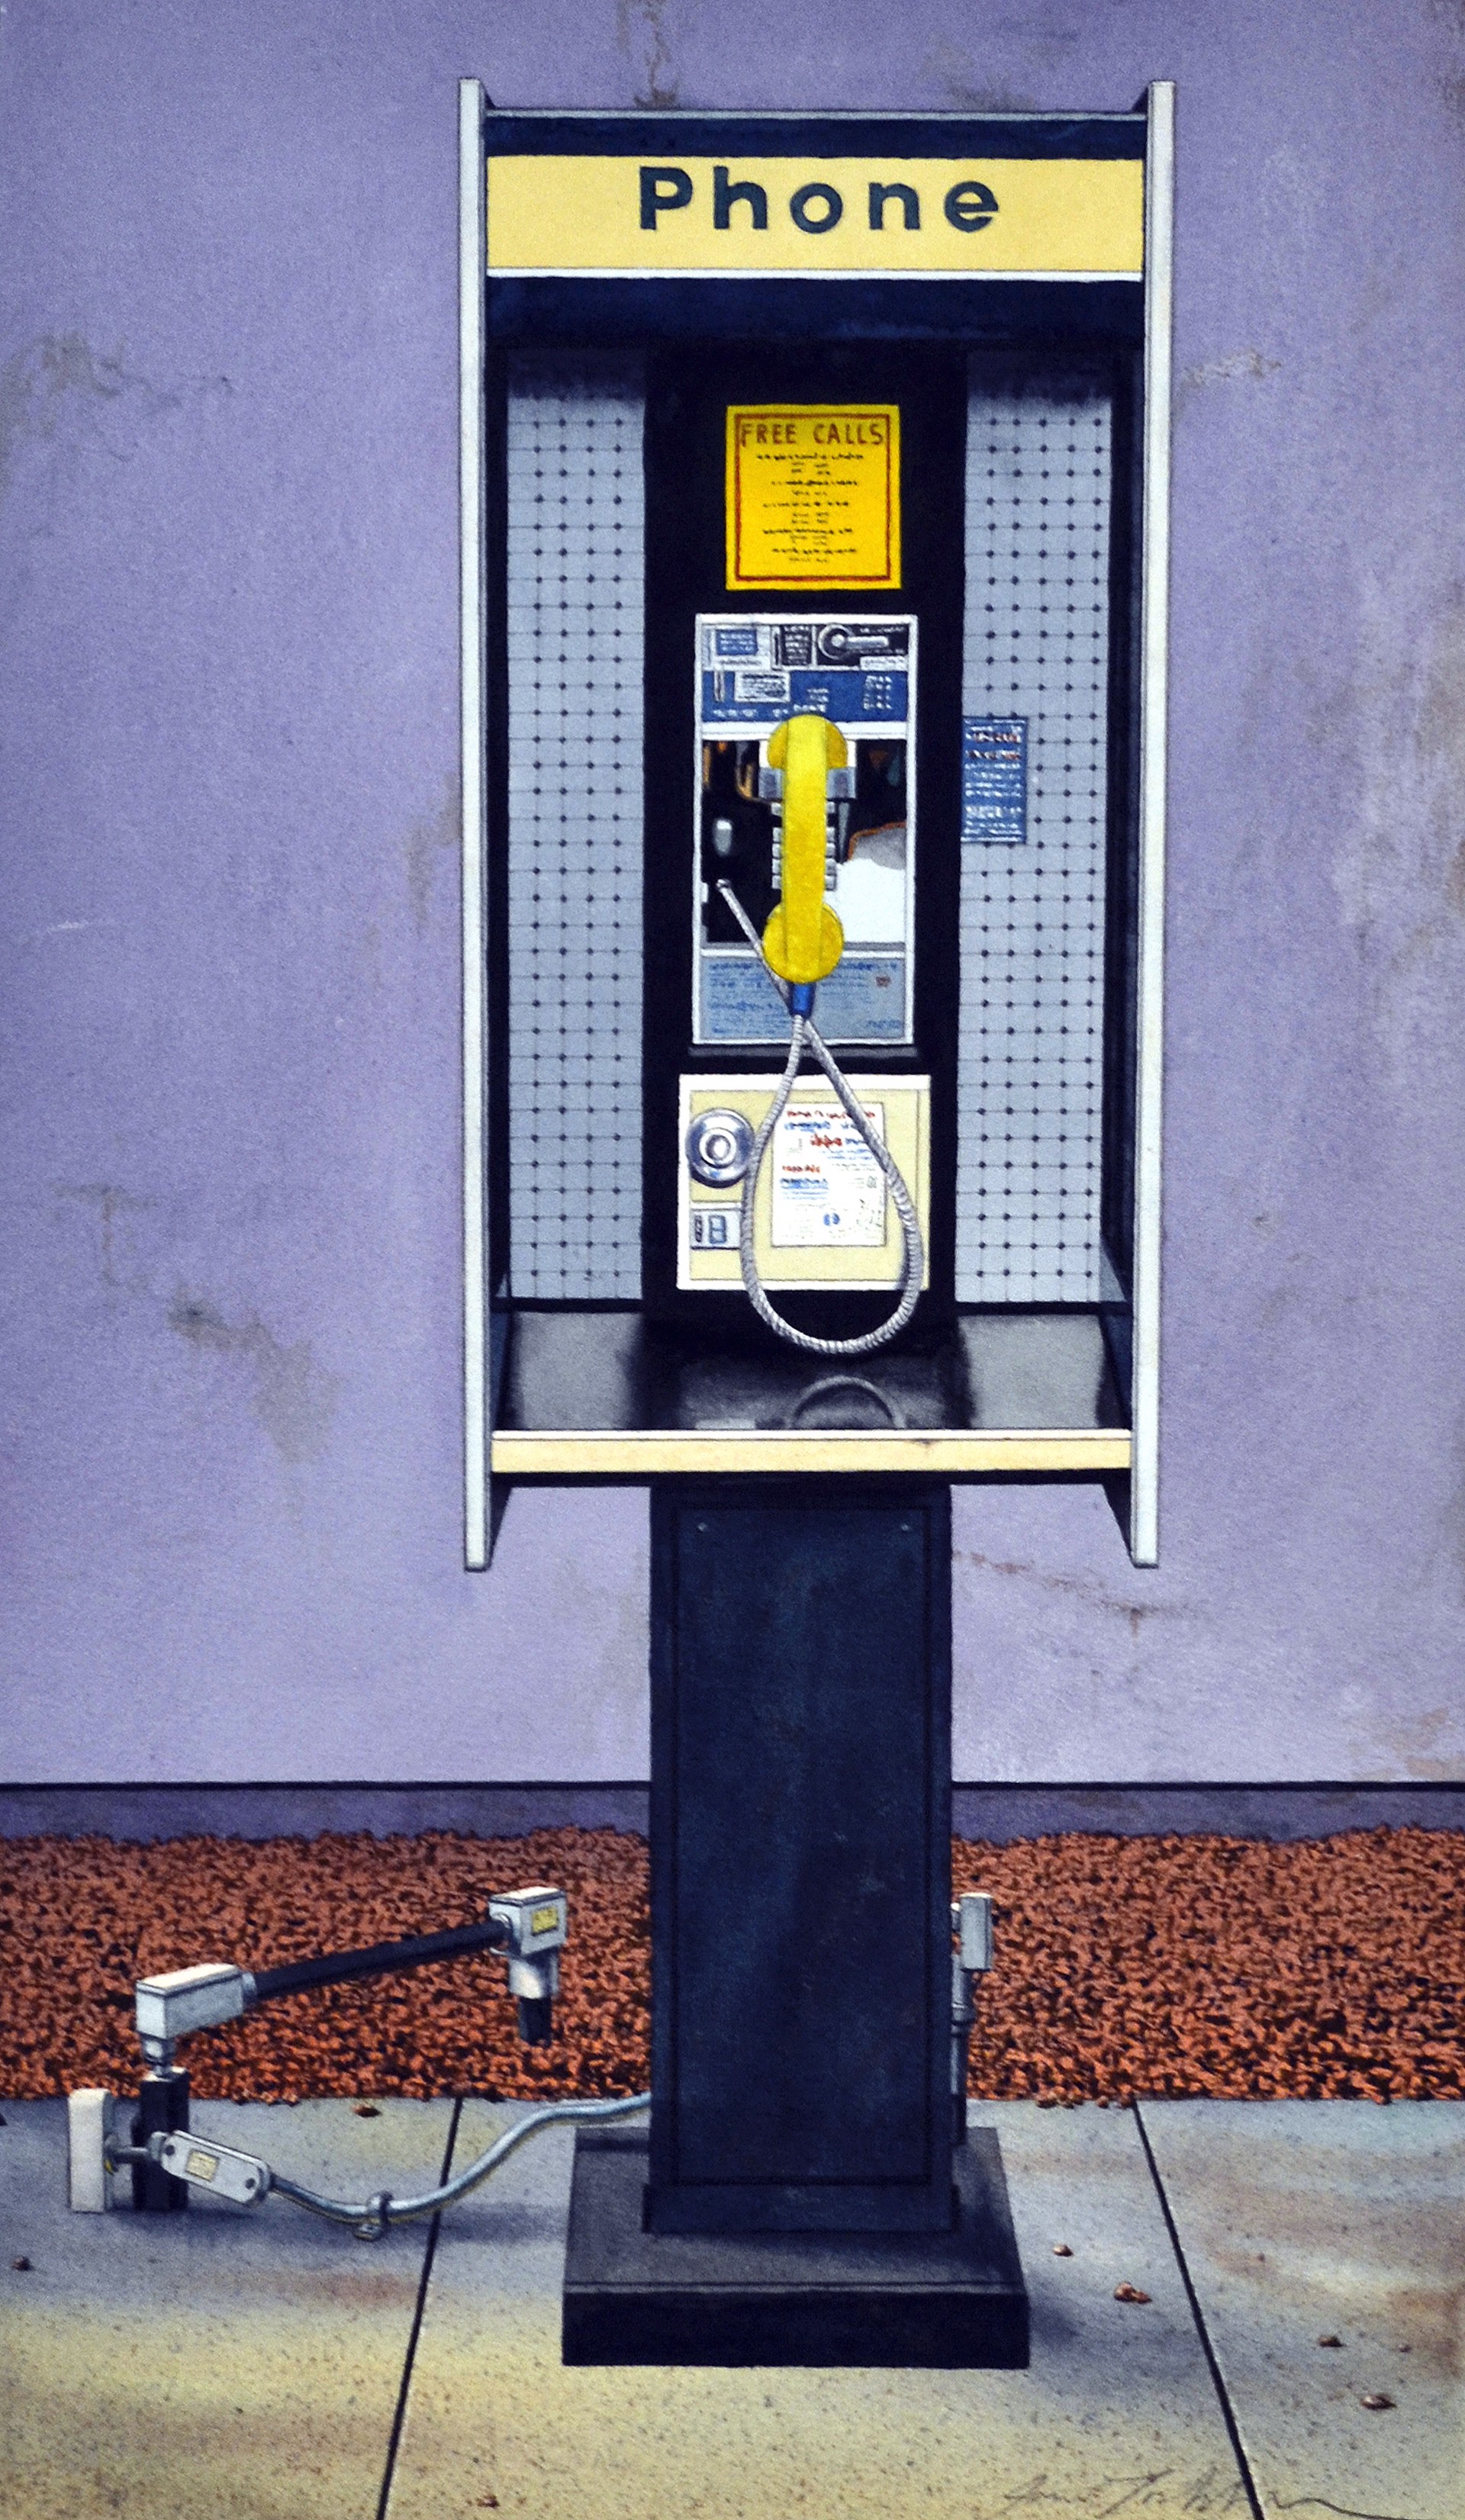 The Yellow Phone by James Torlakson